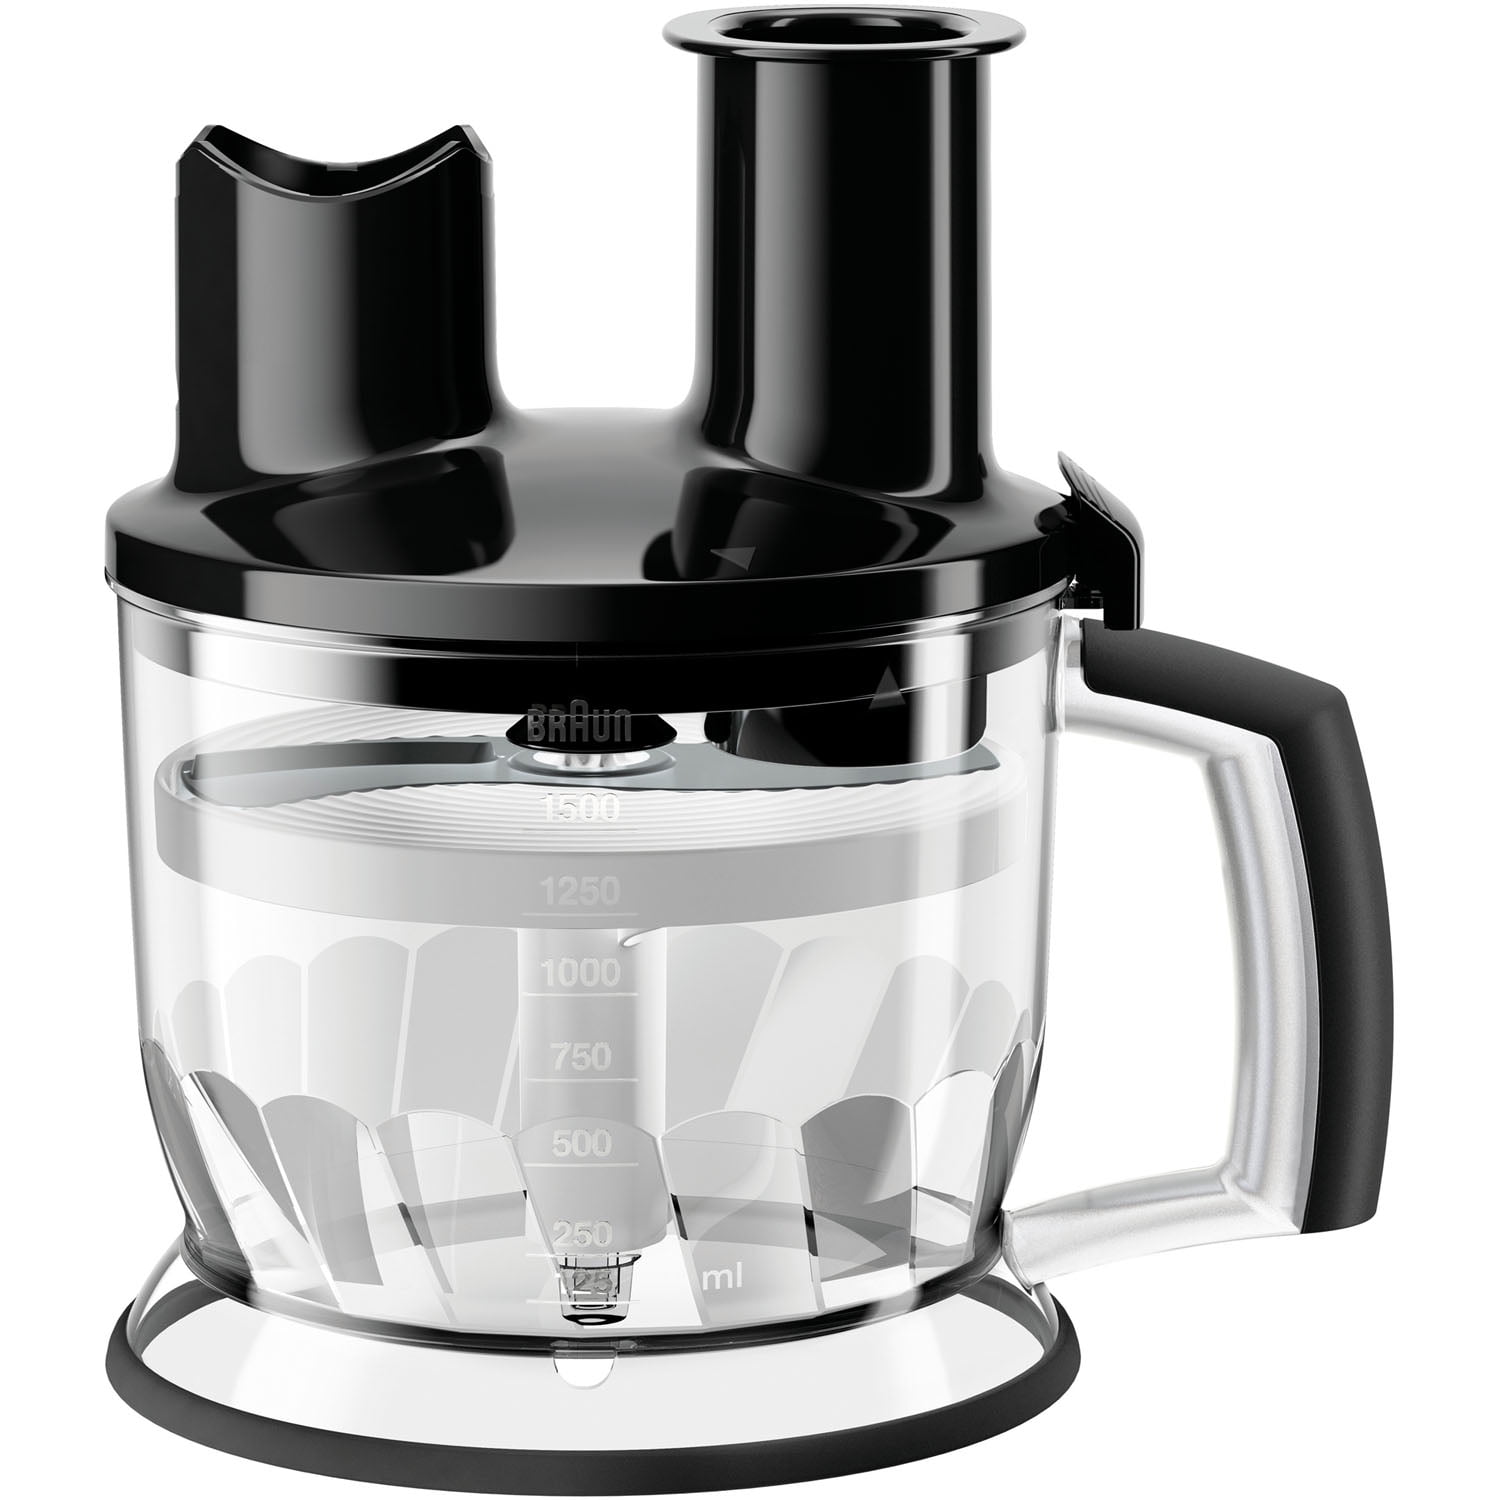 6-Cup Food Processor Attachment for MultiQuick Hand Blenders in Black - Walmart.com